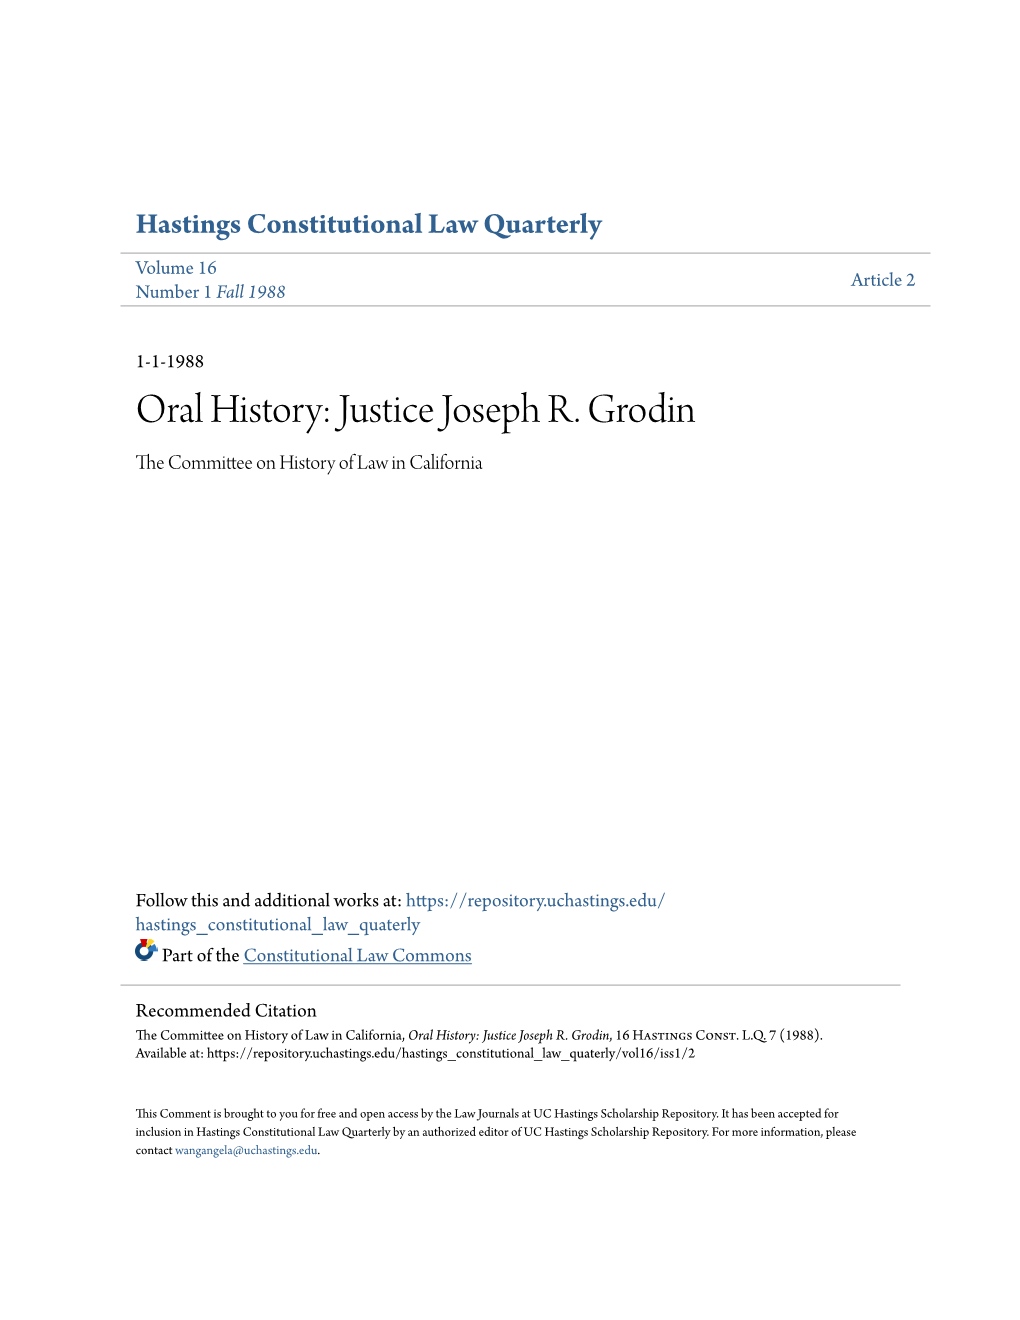 Oral History: Justice Joseph R. Grodin the Ommittc Ee on History of Law in California